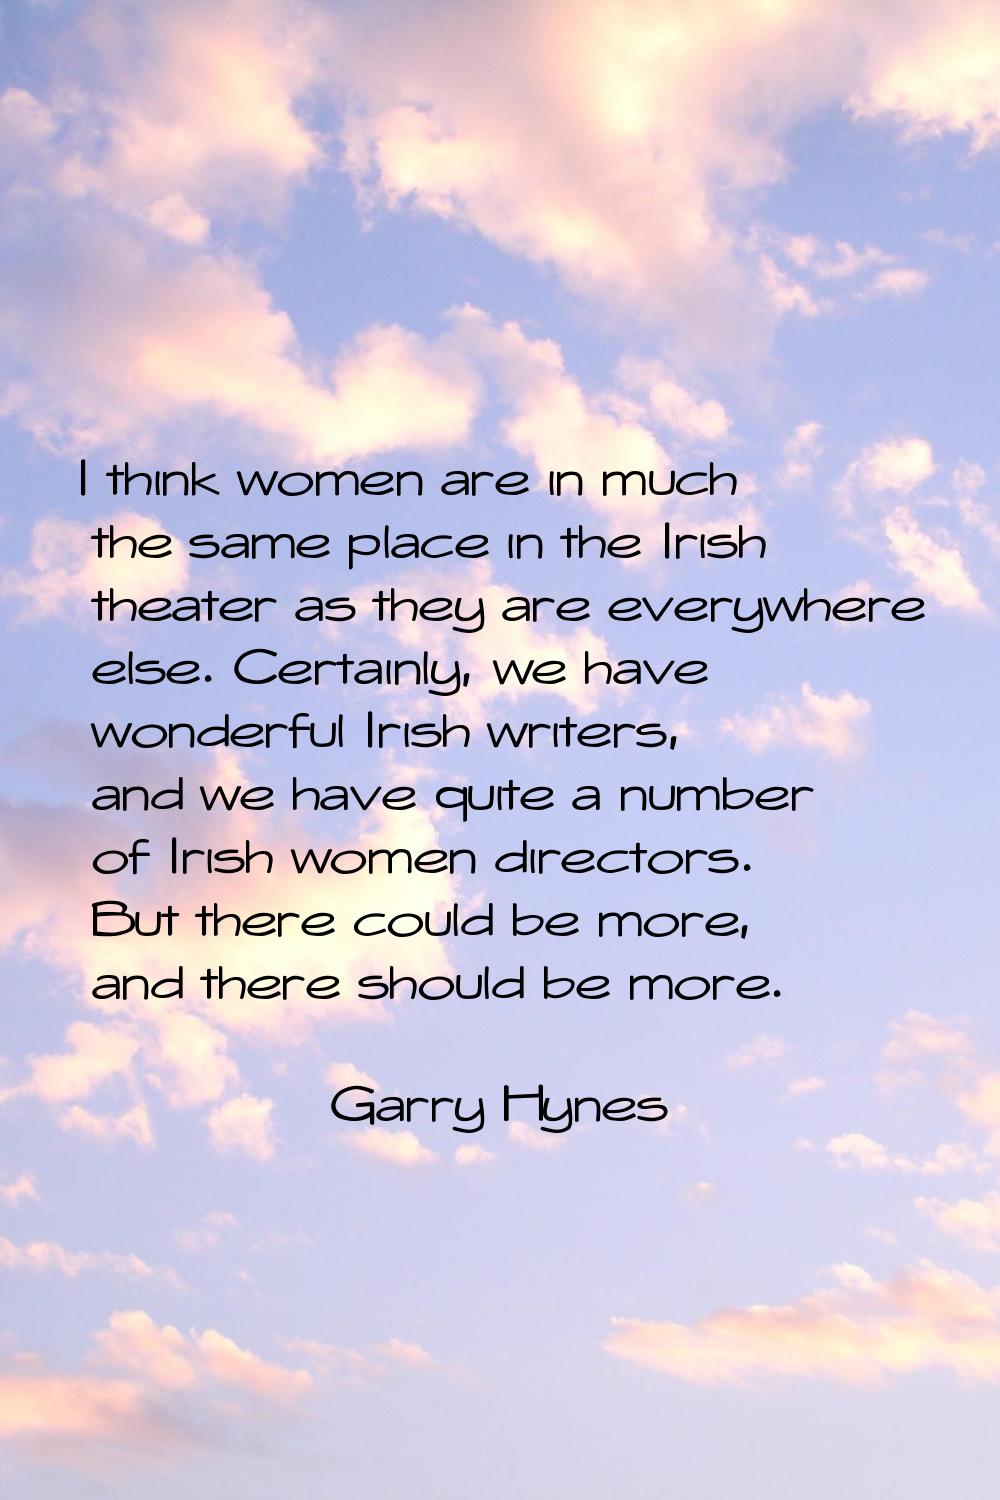 I think women are in much the same place in the Irish theater as they are everywhere else. Certainl